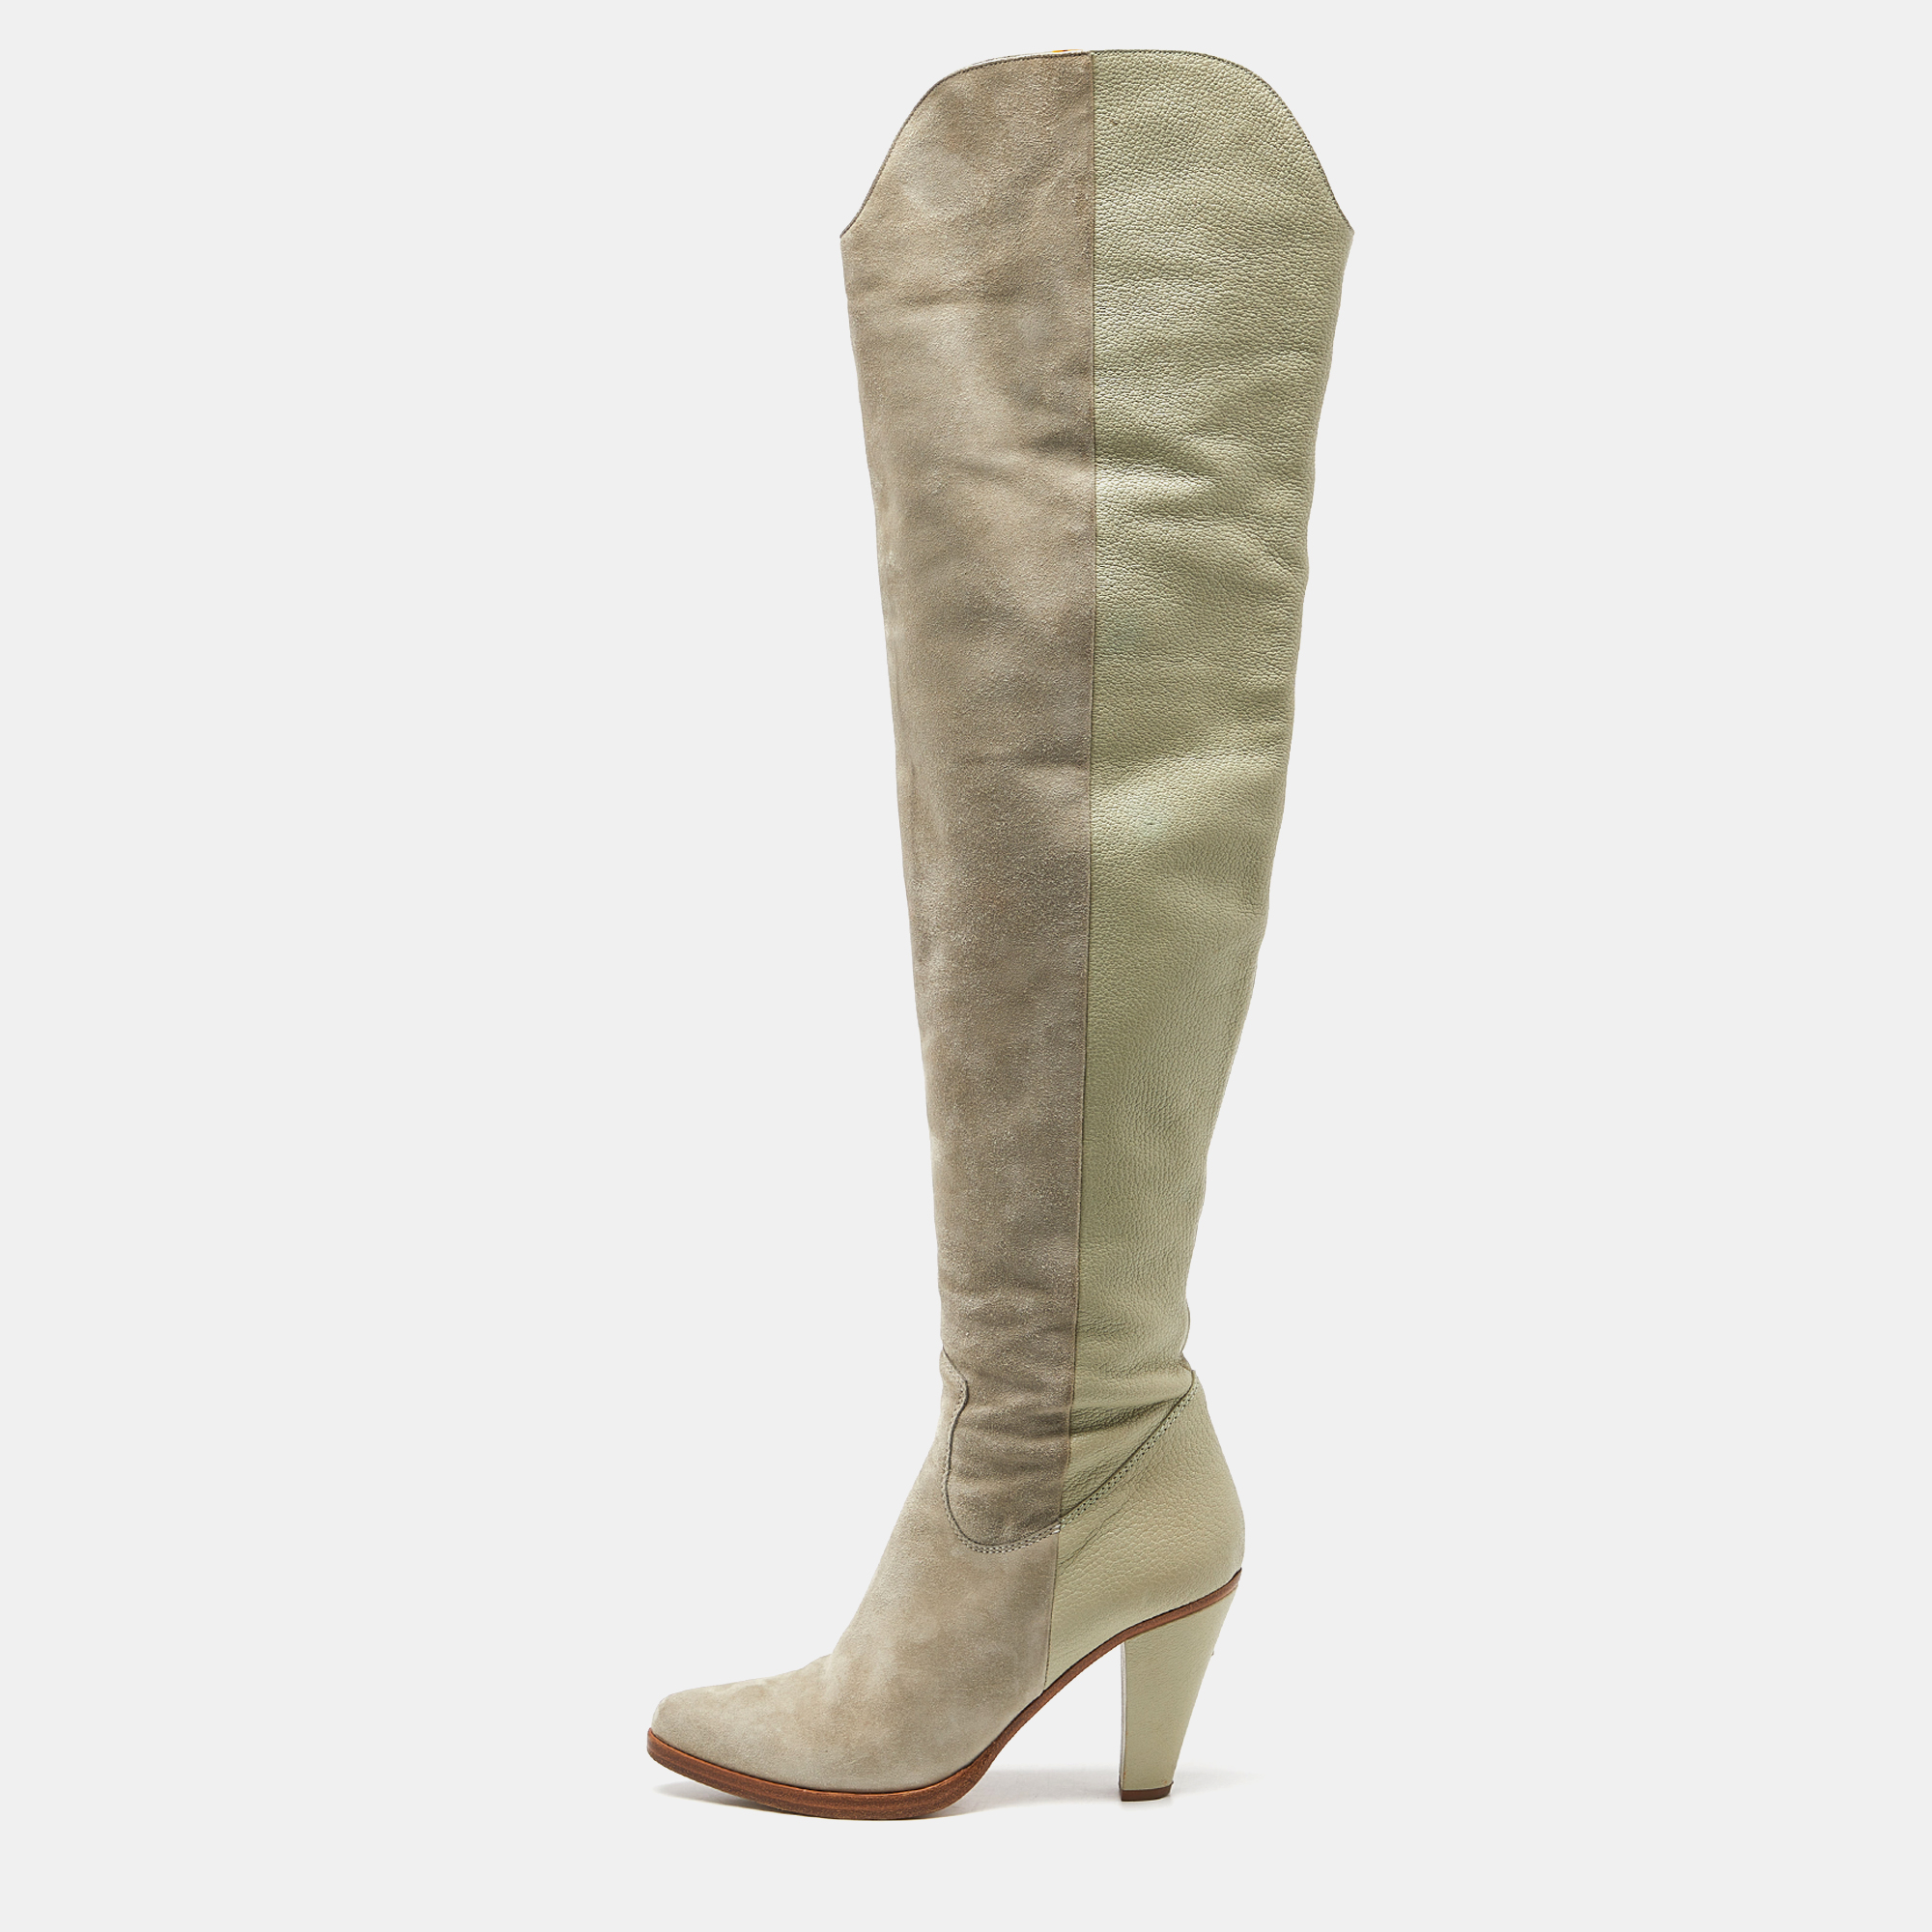 Chloe grey suede and leather over the knee length boots size 39.5